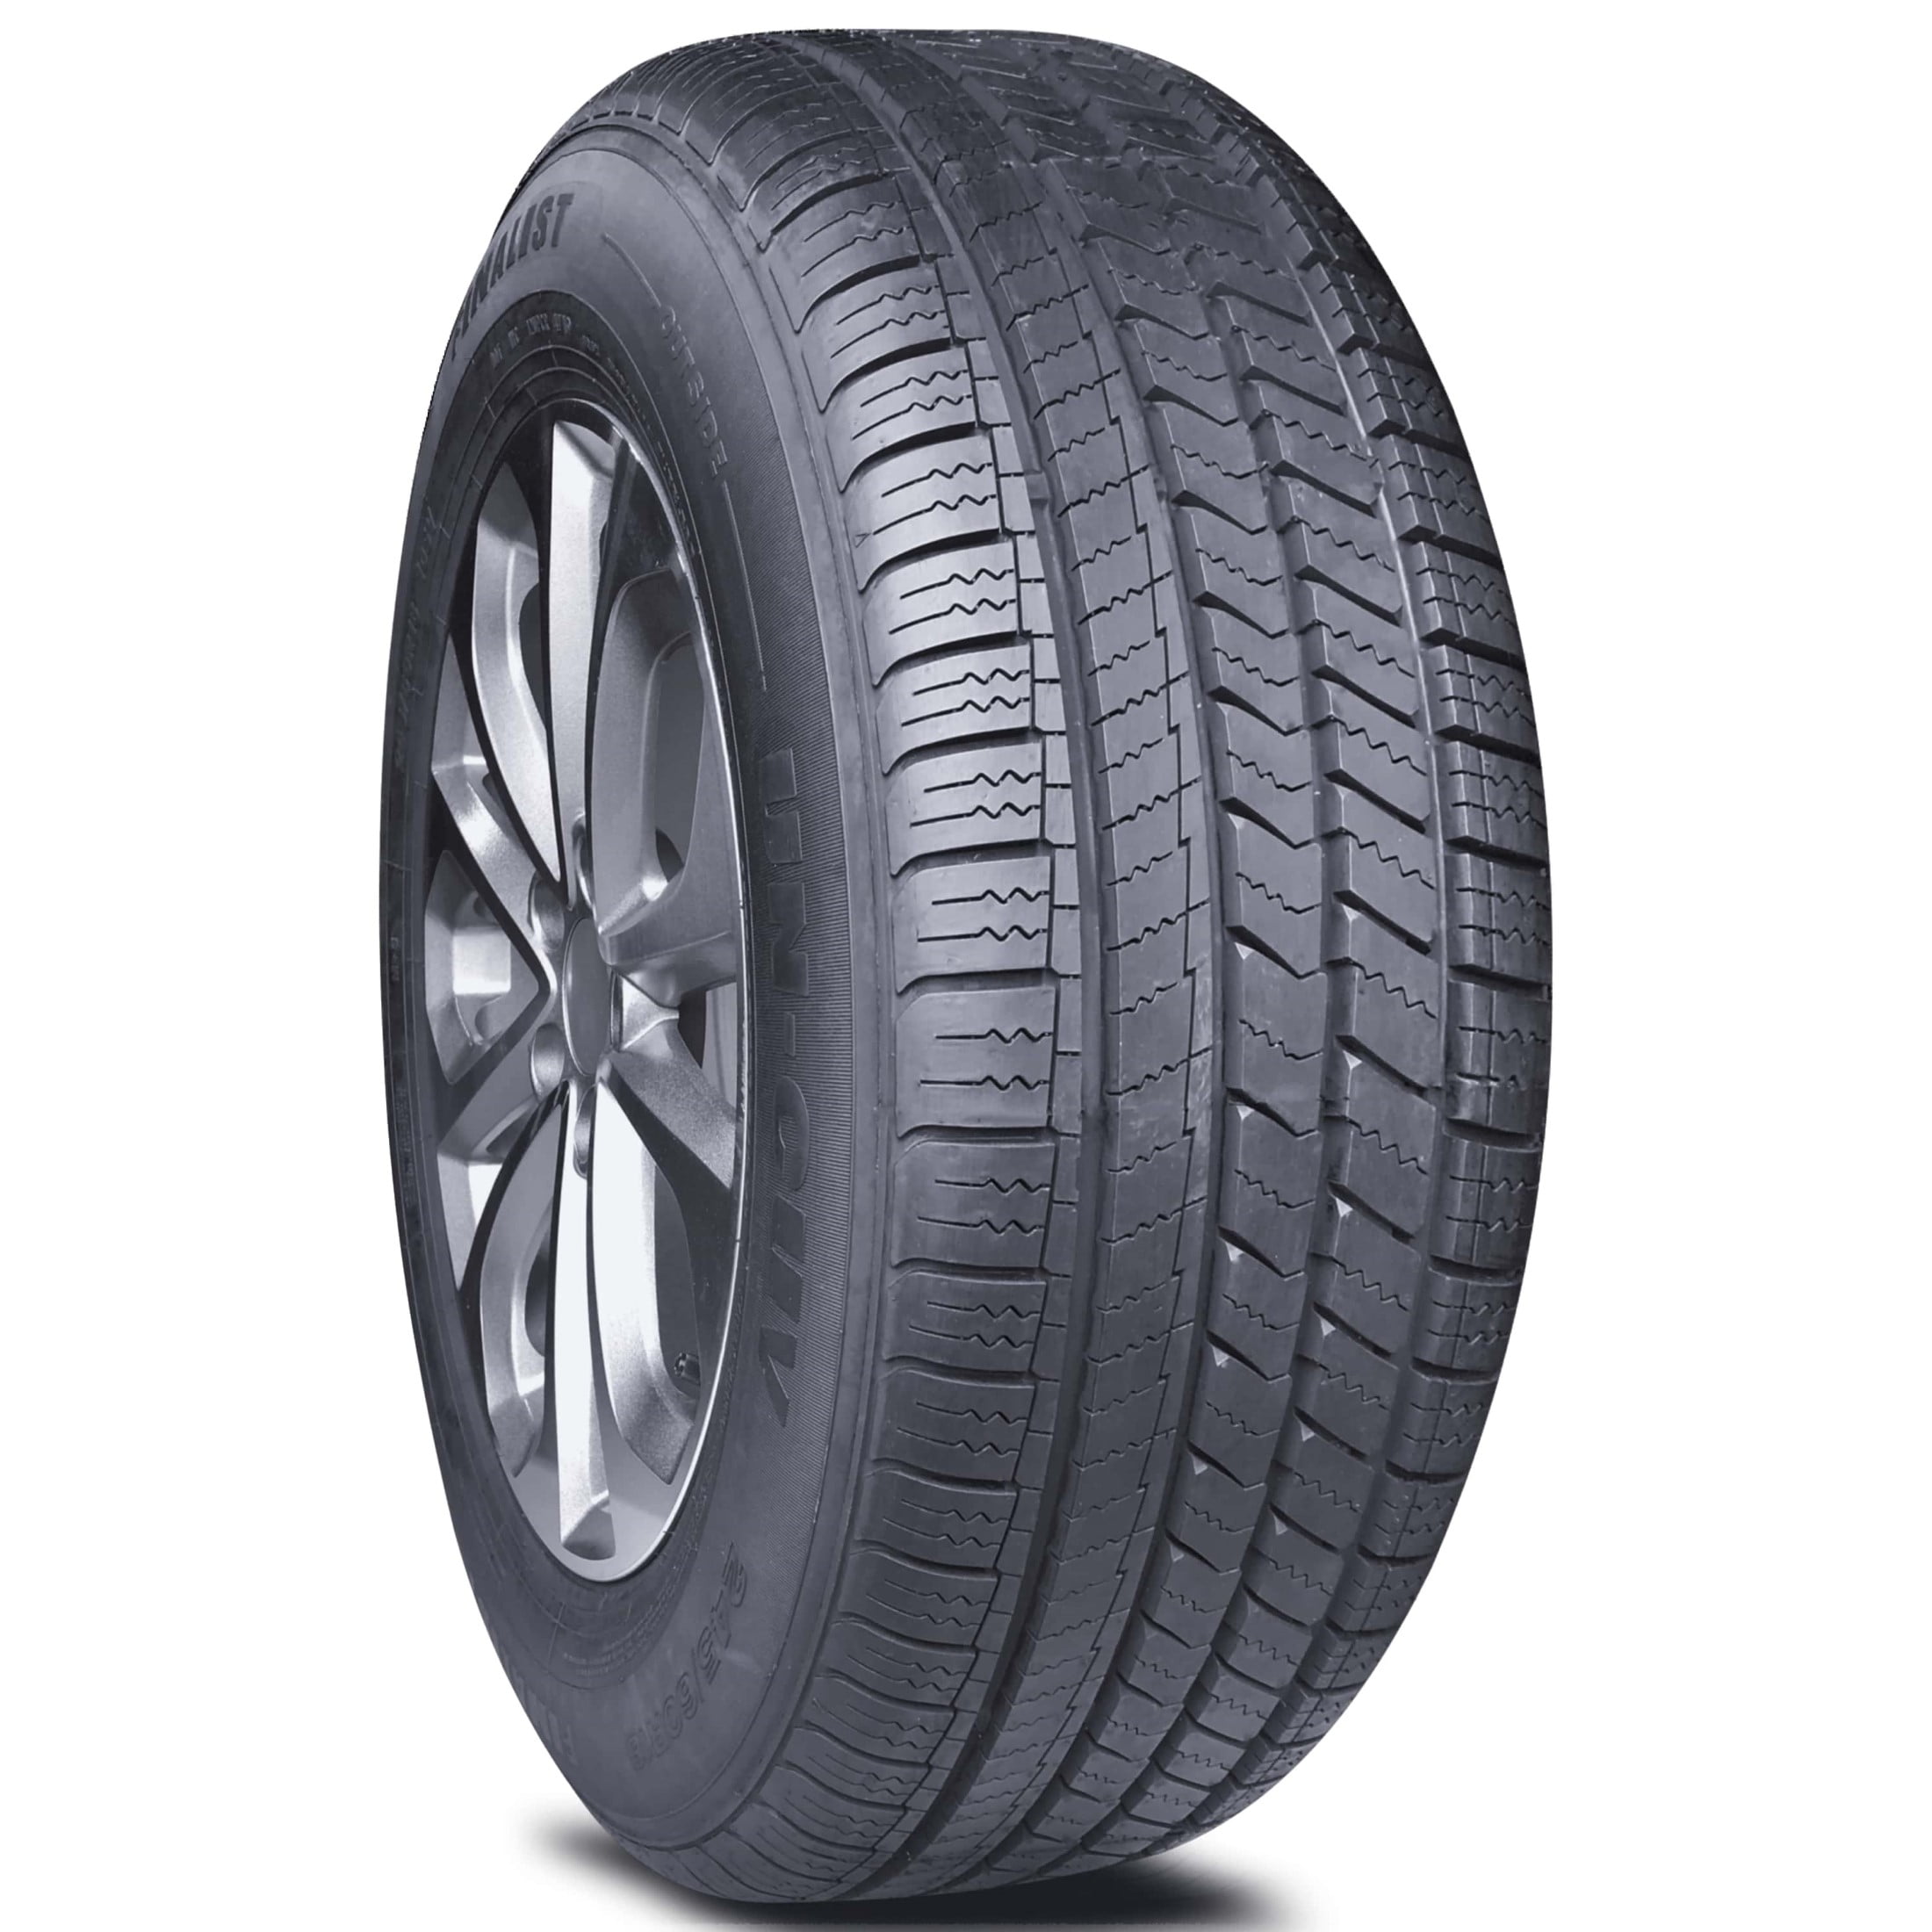 (Tire Load A/S XL Performance CUV Tire Extra Season 235/65R17 SUV High Only) 108V UN-CUV All 235/65/17 Finalist